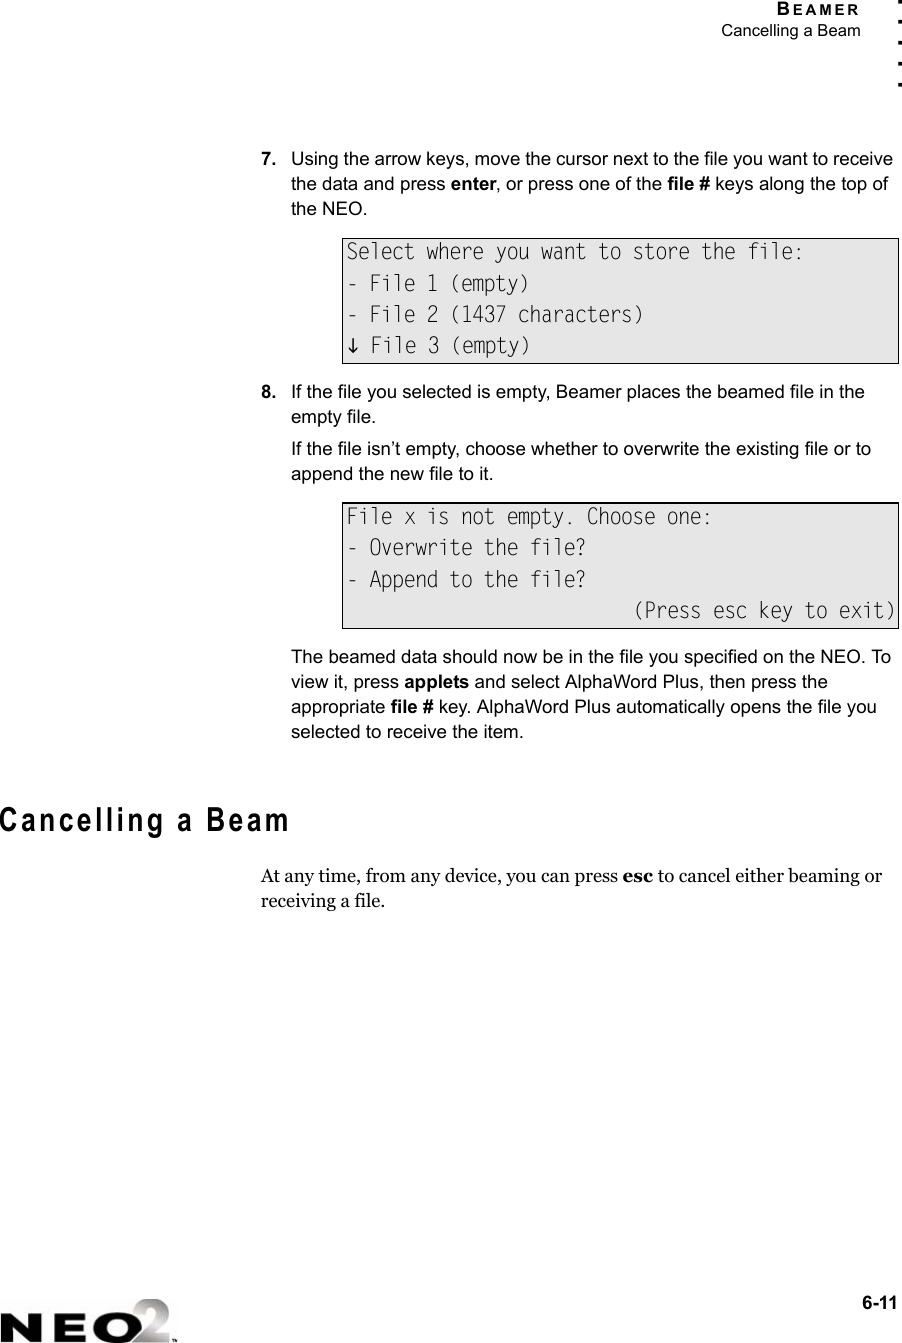 BEAMERCancelling a Beam6-11. . . . .7. Using the arrow keys, move the cursor next to the file you want to receive the data and press enter, or press one of the file # keys along the top of the NEO.8. If the file you selected is empty, Beamer places the beamed file in the empty file.If the file isn’t empty, choose whether to overwrite the existing file or to append the new file to it.The beamed data should now be in the file you specified on the NEO. To view it, press applets and select AlphaWord Plus, then press the appropriate file # key. AlphaWord Plus automatically opens the file you selected to receive the item. Cancelling a BeamAt any time, from any device, you can press esc to cancel either beaming or receiving a file.Select where you want to store the file:- File 1 (empty)- File 2 (1437 characters)L File 3 (empty)File x is not empty. Choose one:- Overwrite the file?- Append to the file?(Press esc key to exit)